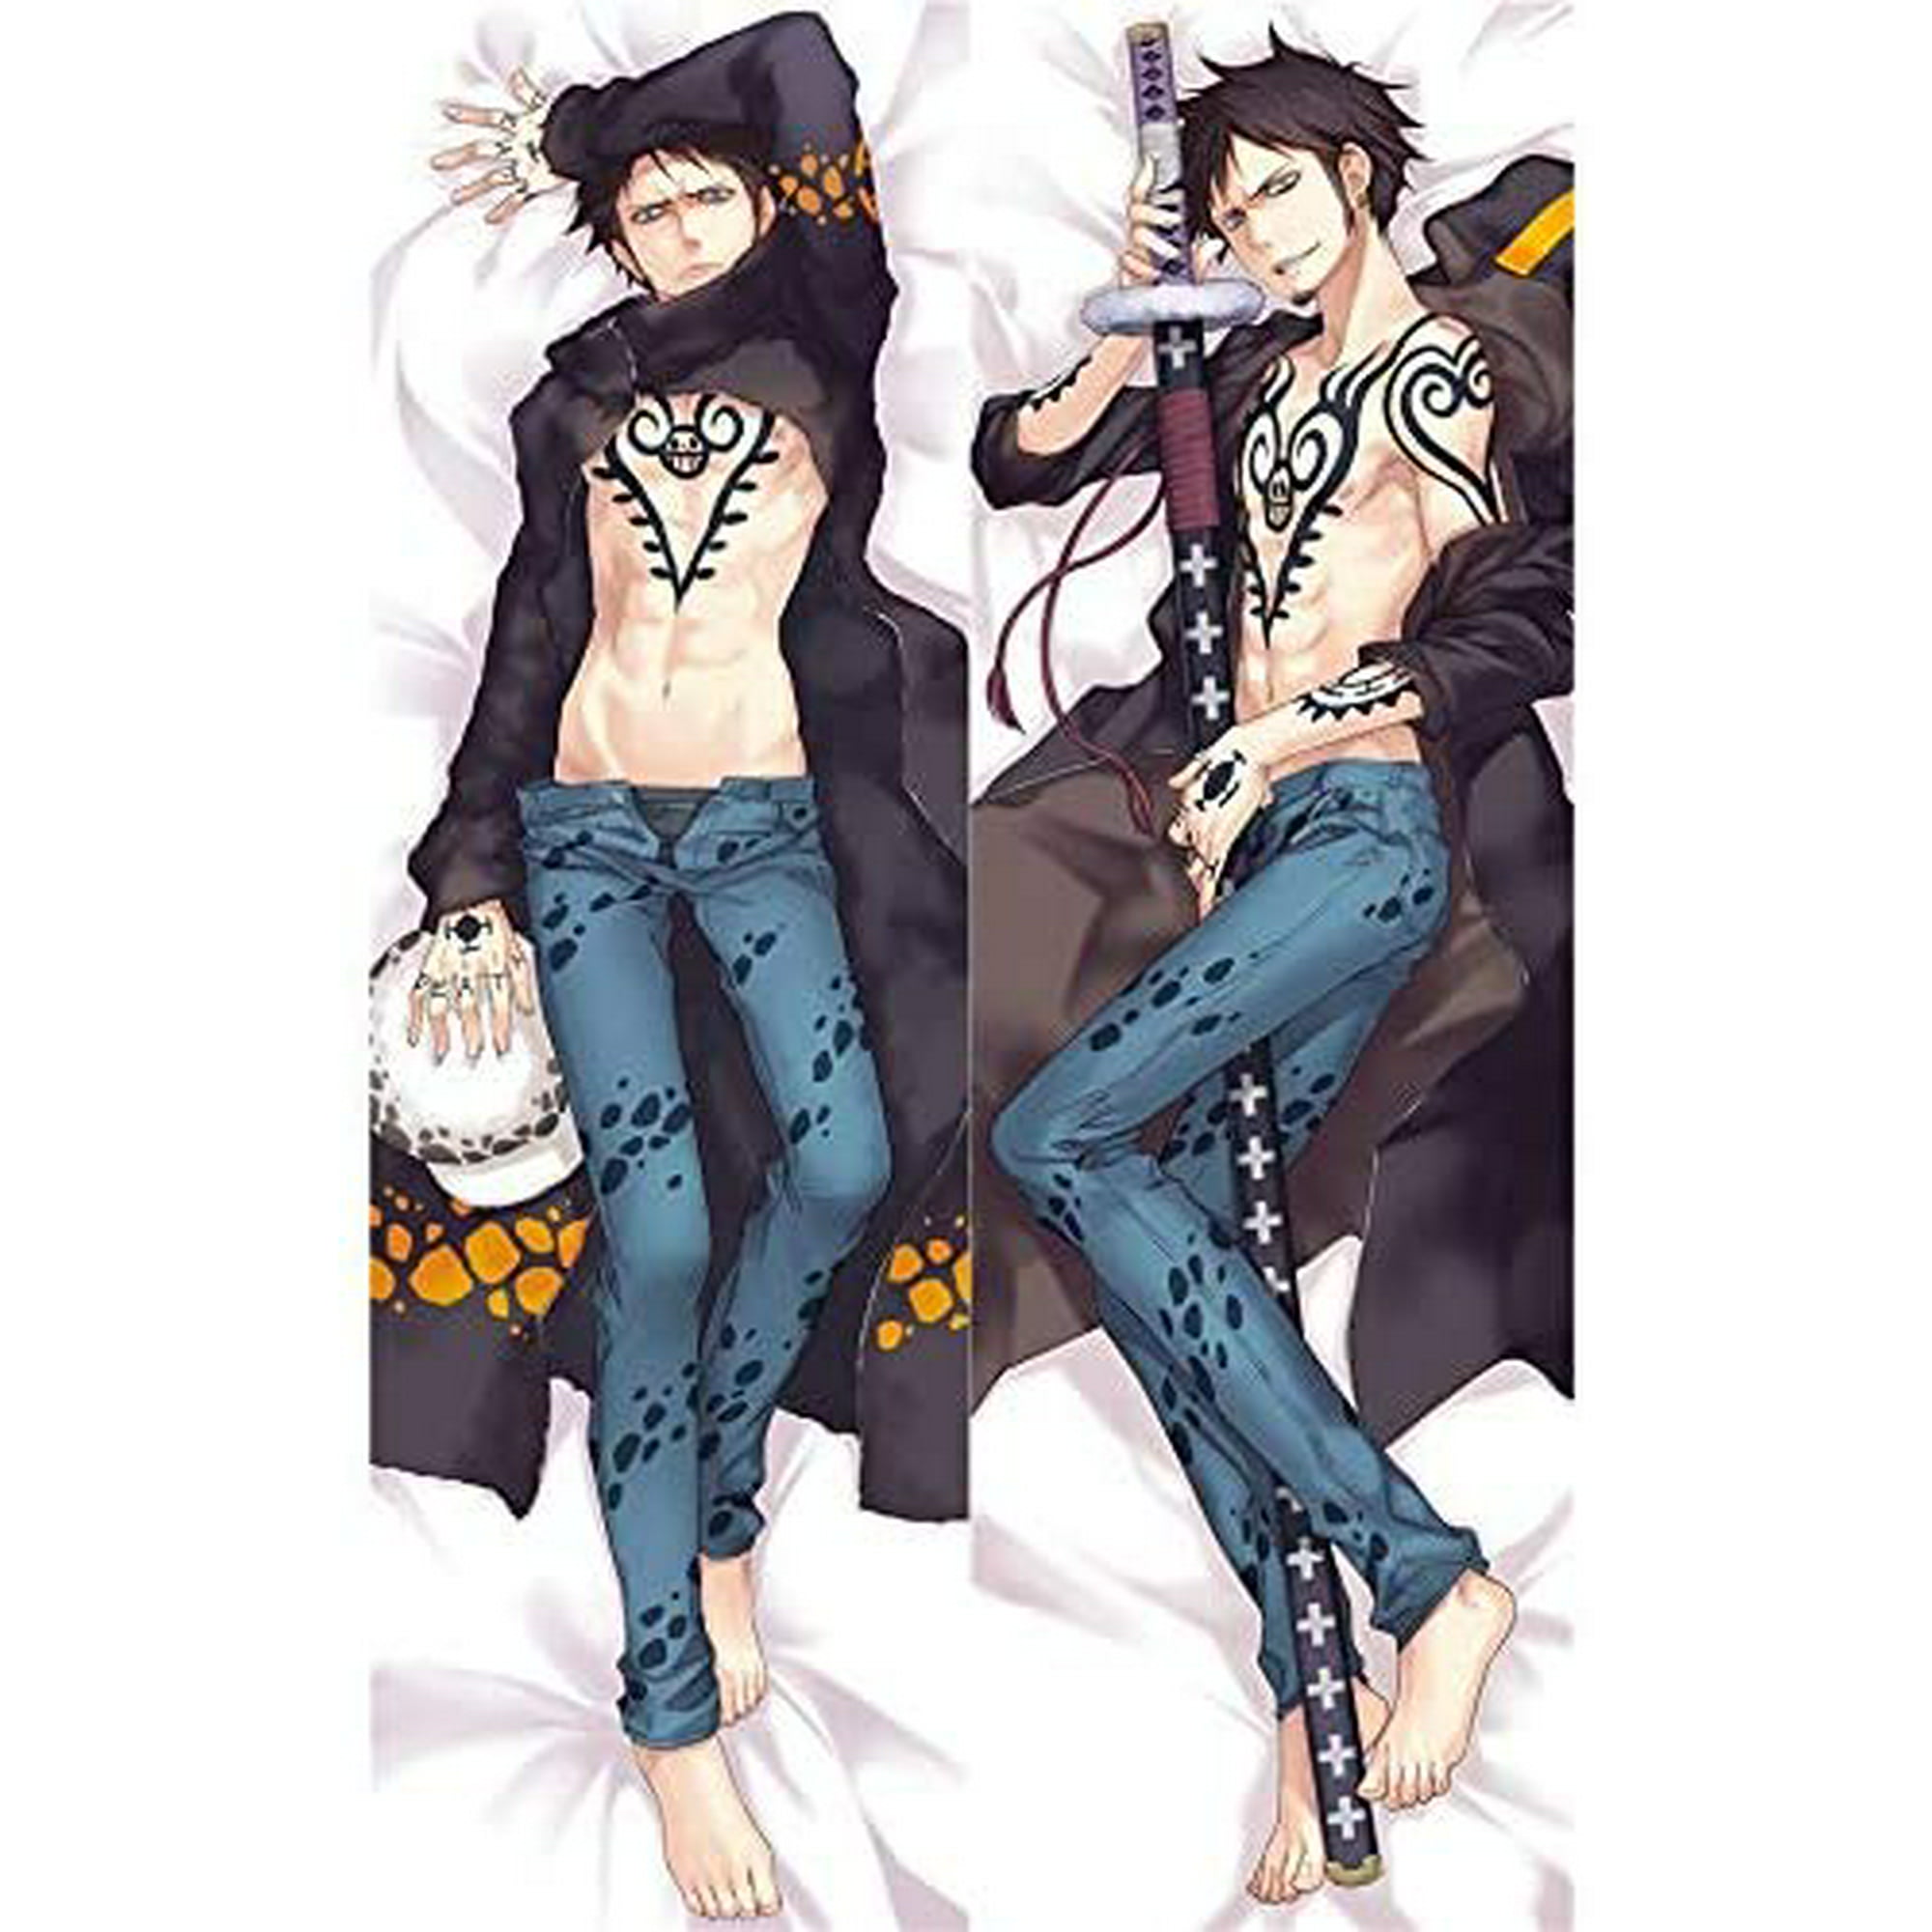 rthui ty ONE Piece: Trafalgar D Water Law 1073 Anime Pillow Cover/Body  Pillowcase, Anime Handsome Man Doublerthui ty Sided Pattern Peach  Skin/Plush/2WT Pillow Case, Cushion Covers | Walmart Canada